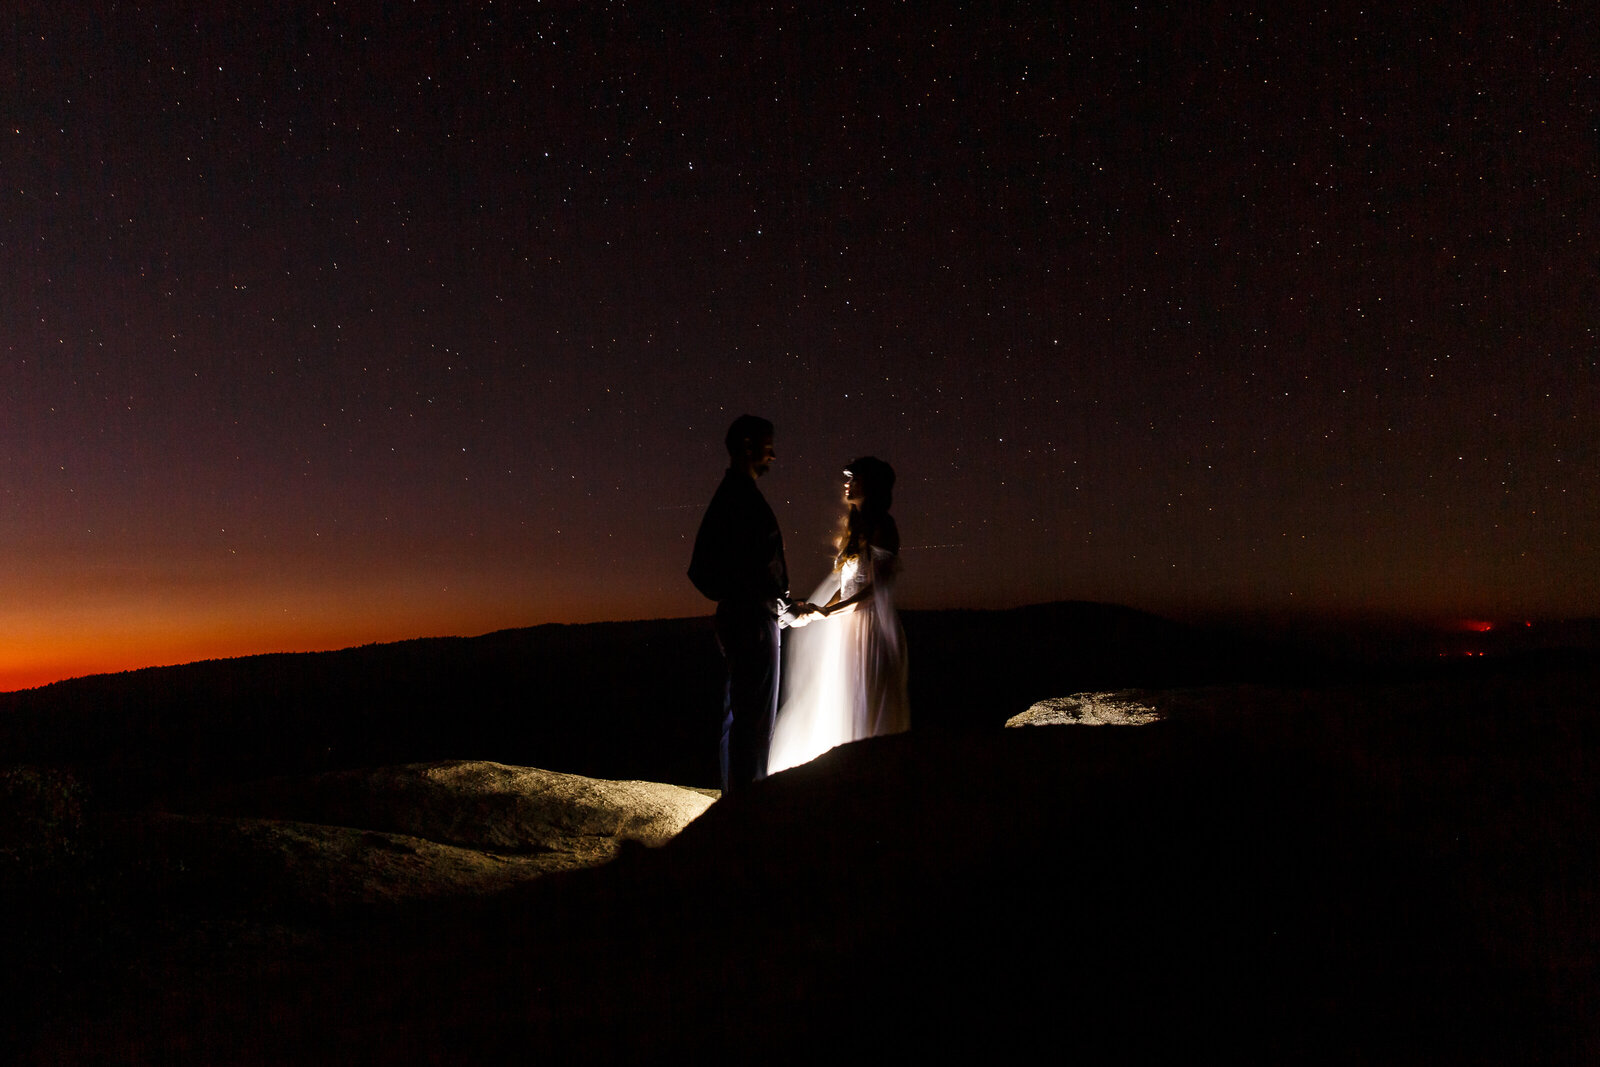 This couple eloped in Yosemite and stayed out to stargaze.